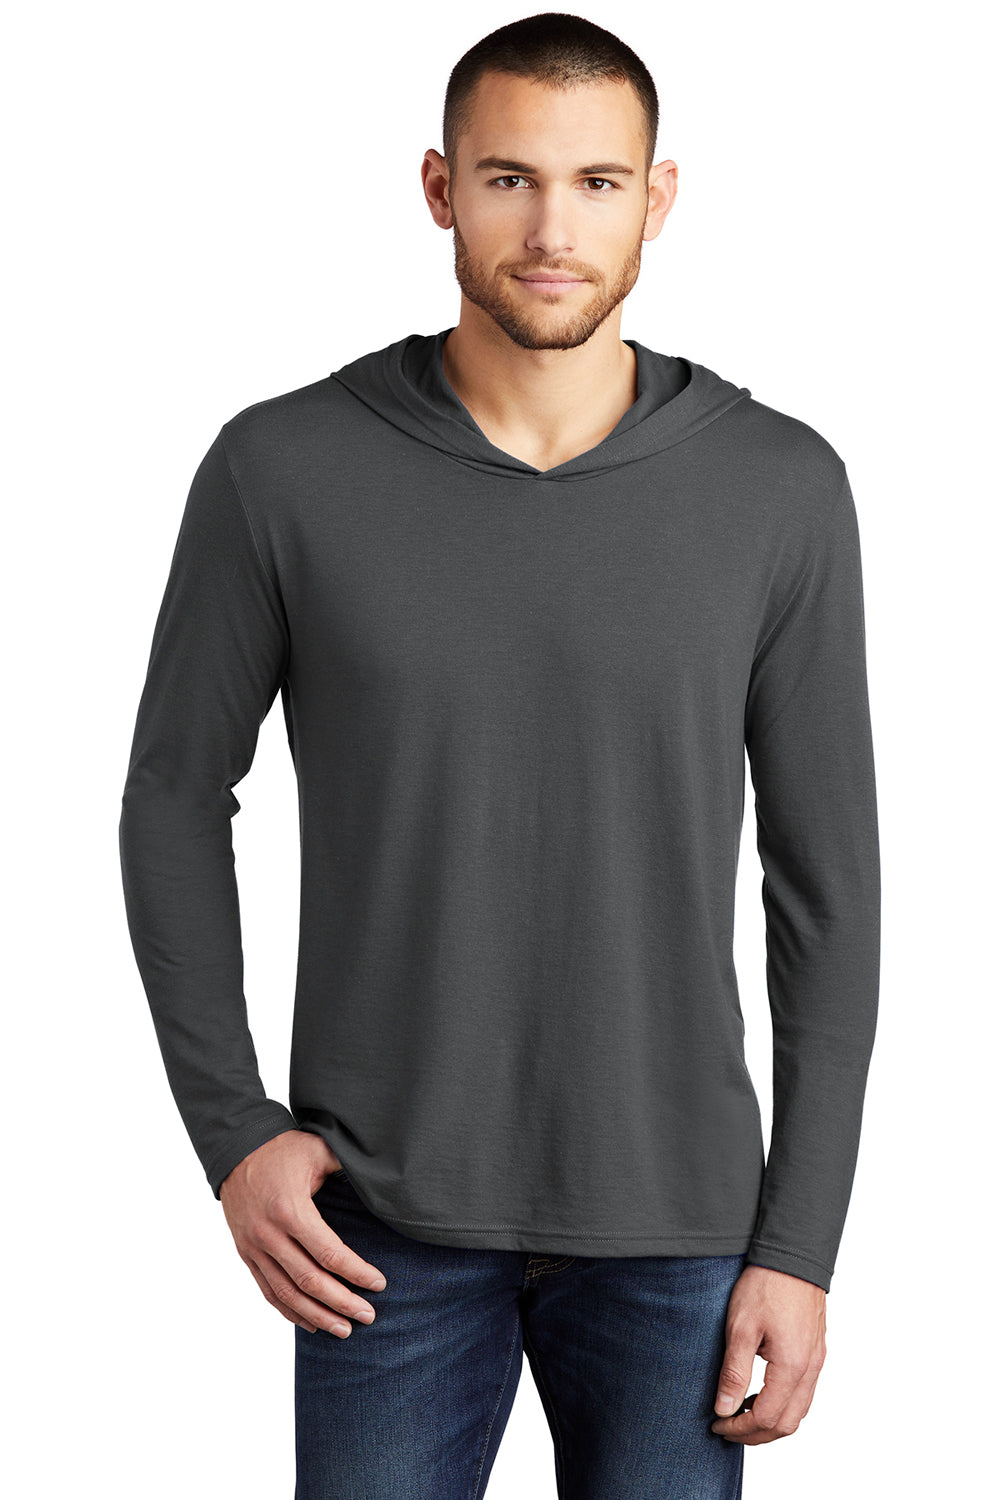 District DM139 Mens Perfect Tri Long Sleeve Hooded T-Shirt Hoodie Charcoal Grey Front